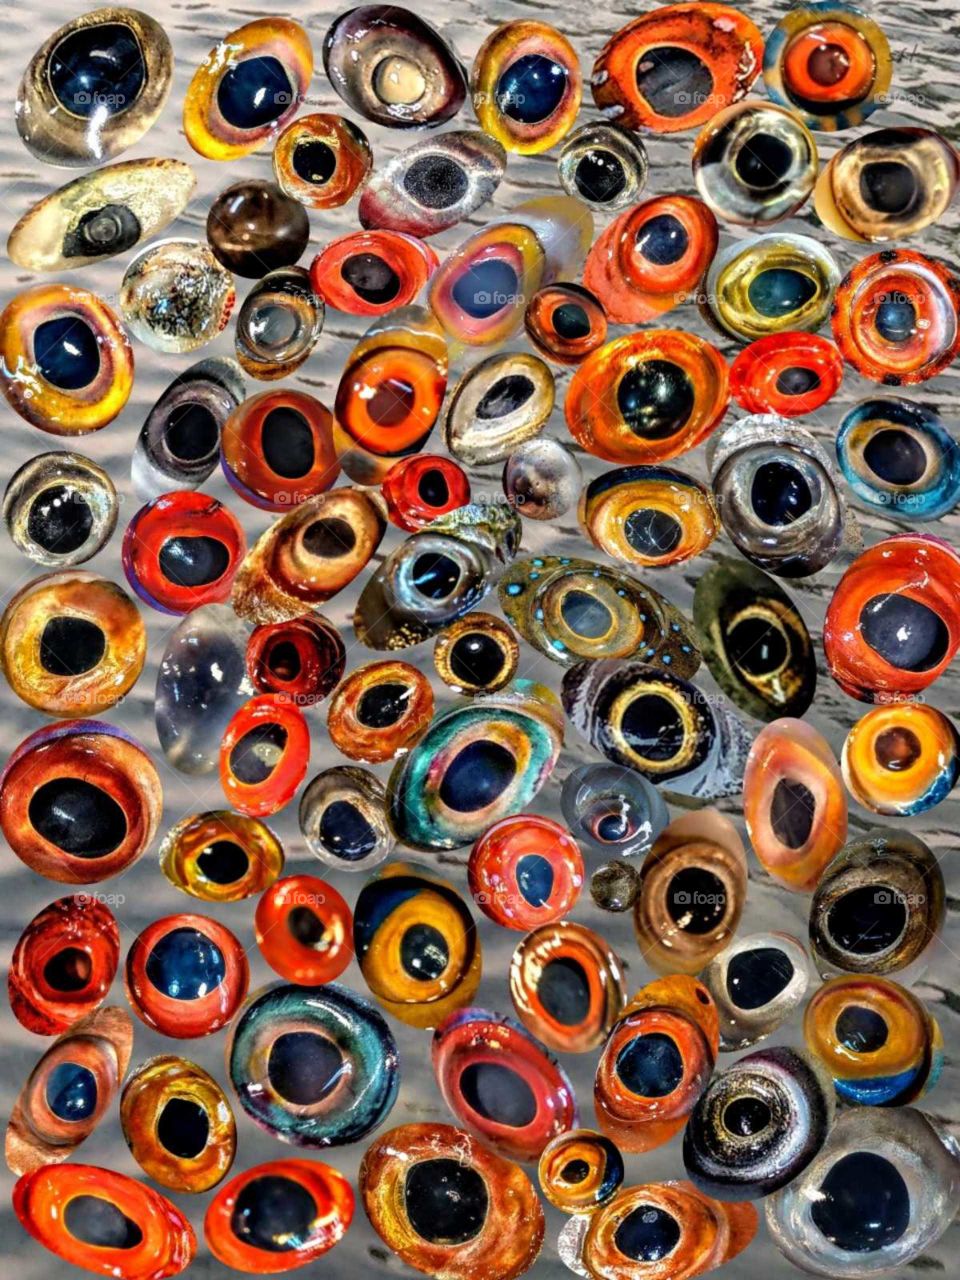 I found many fishes' eyes be vibrant and beautiful in market before. so I took many photos for them, then I arranged them into one photo, became a gem-like
,colorful and bright fishes' eyes photo.